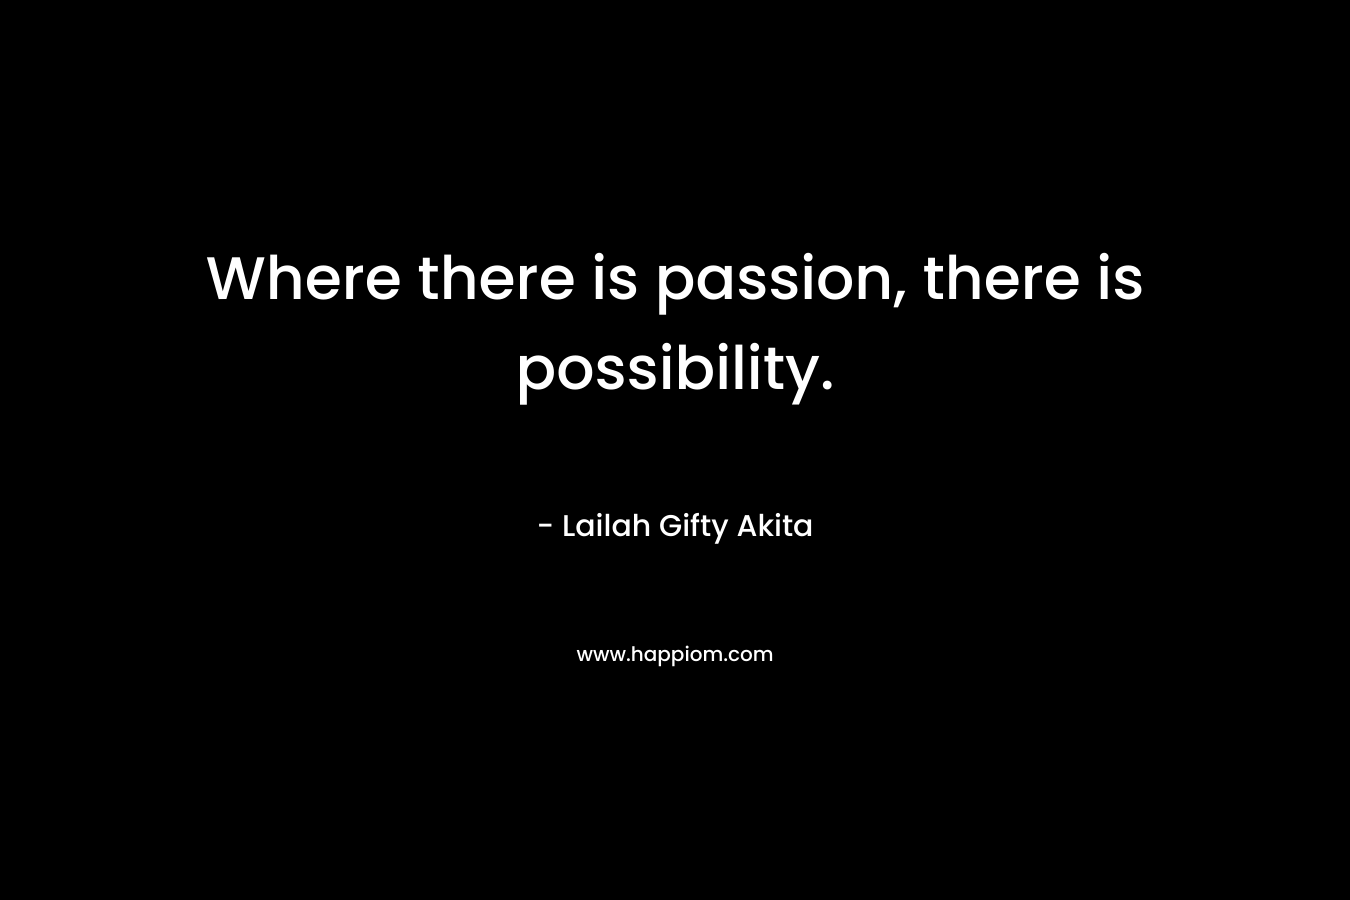 Where there is passion, there is possibility.